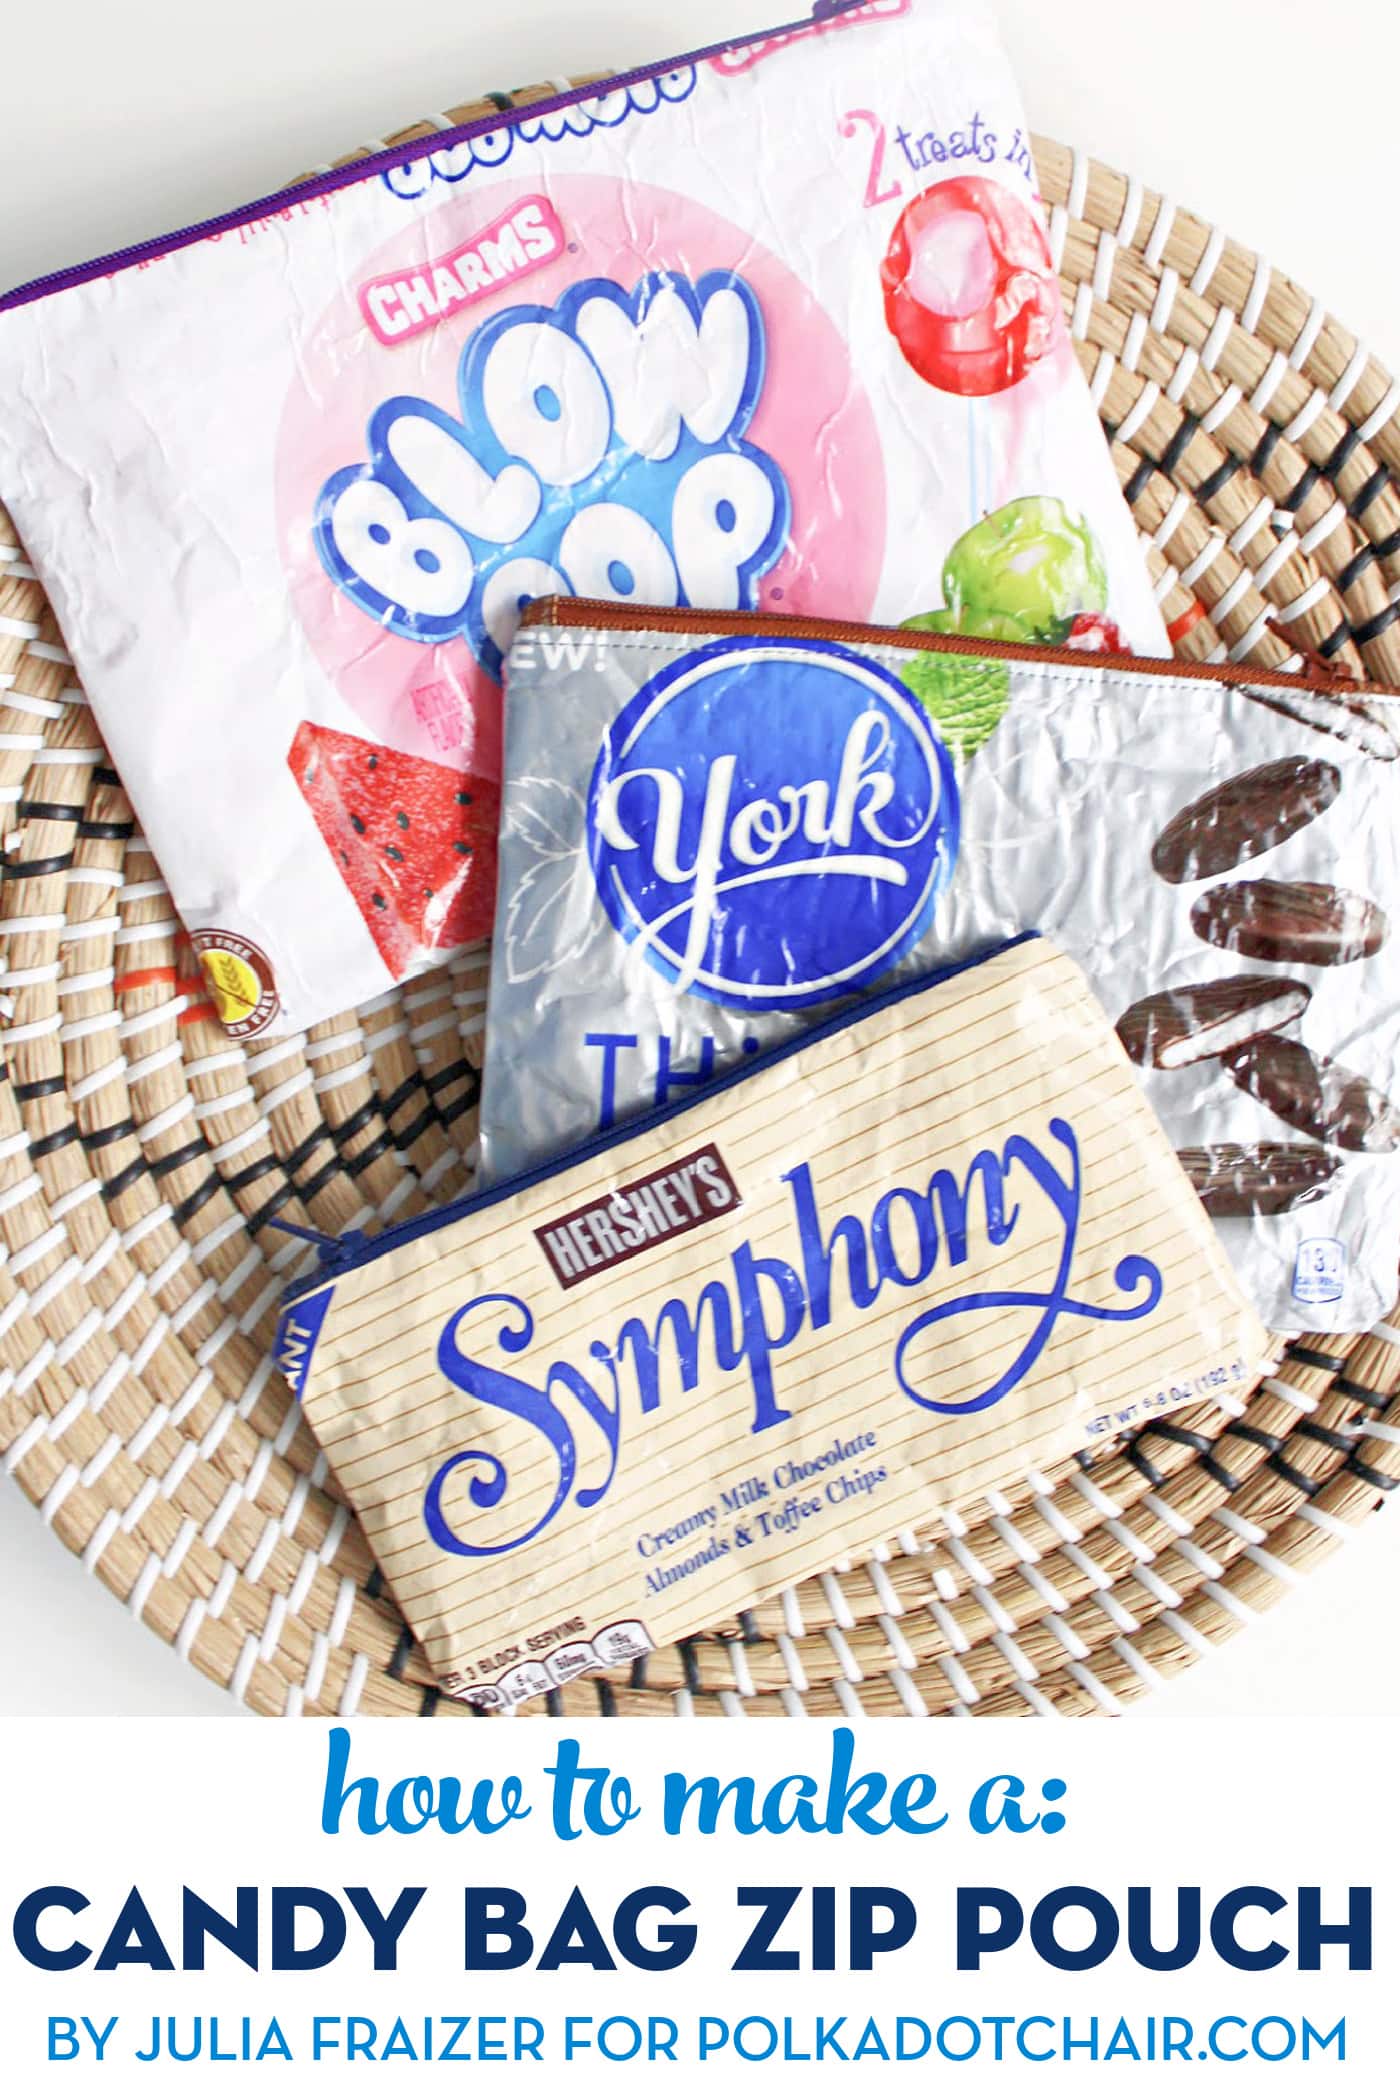 Candy Wrapper Purse | Clothing and Apparel | ksl.com